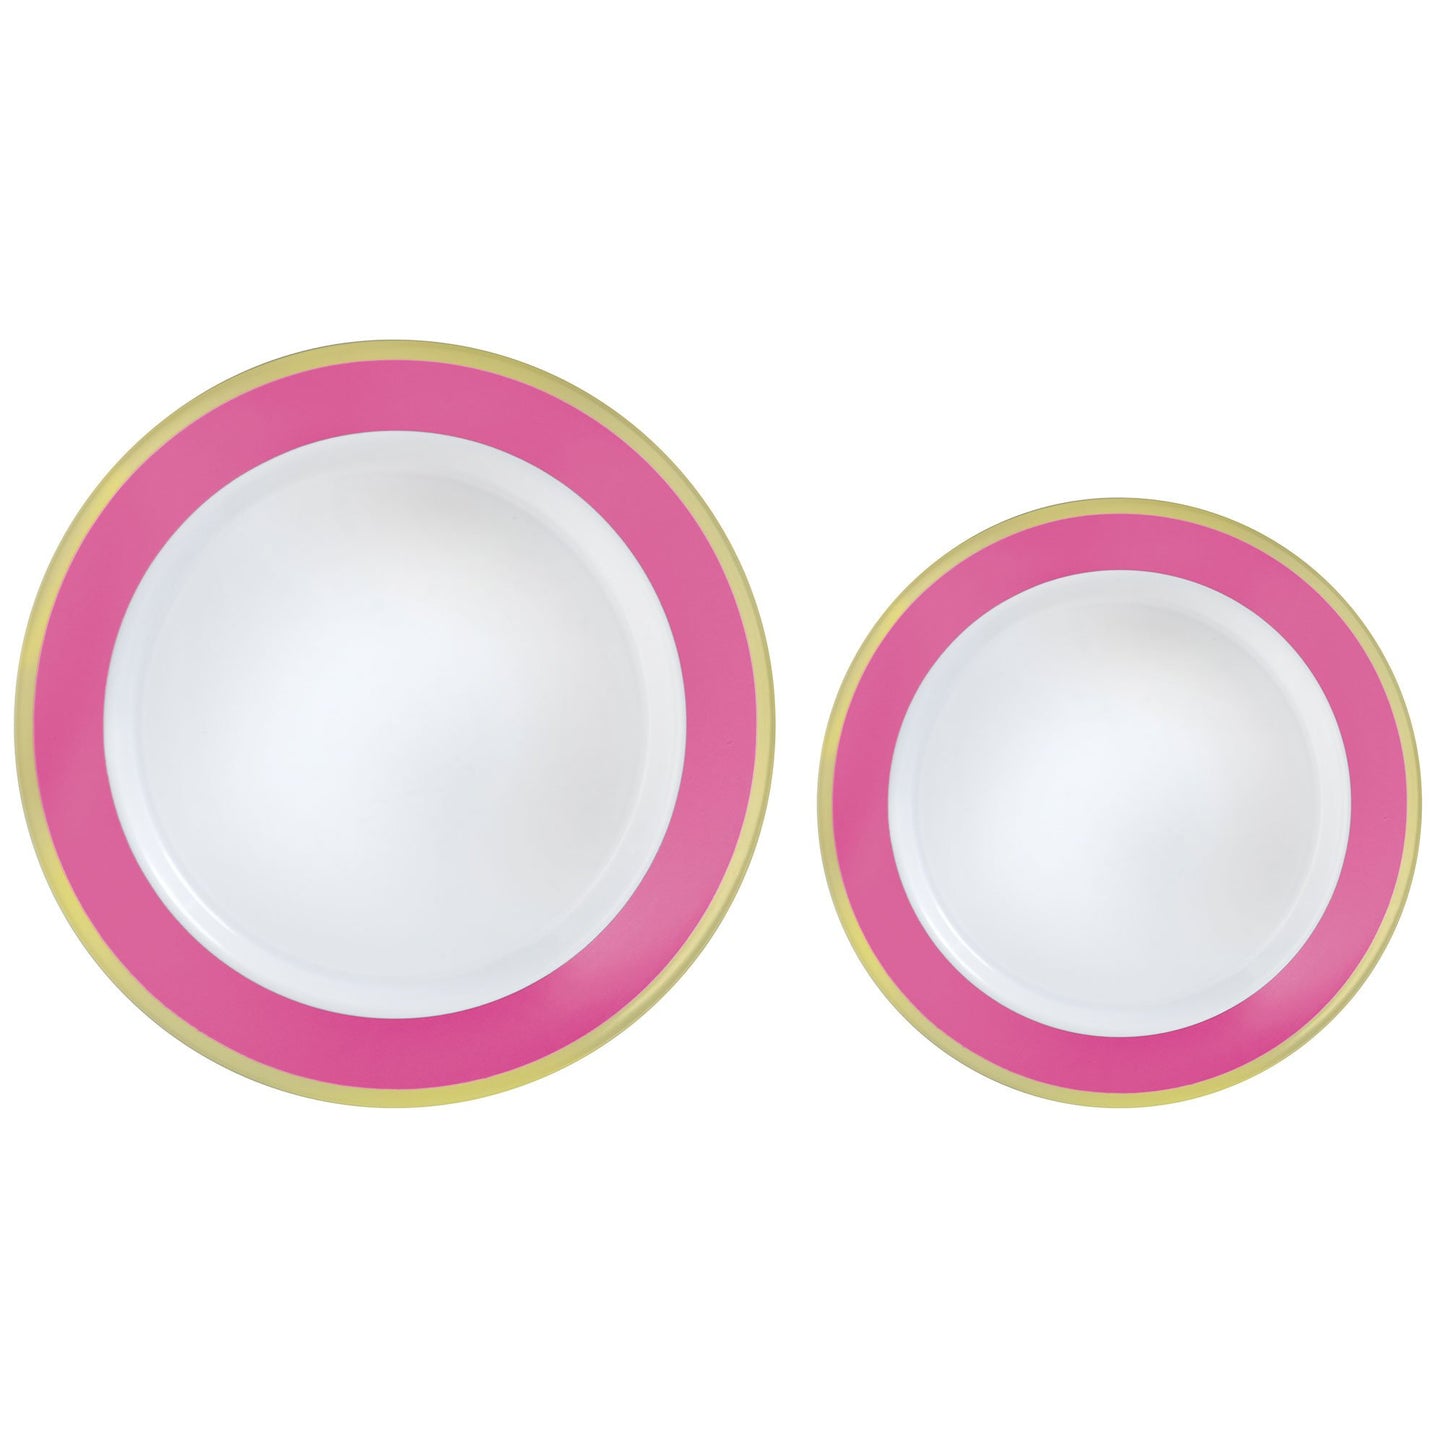 Premium Plastic Plates Hot Stamped with Bright Pink Border